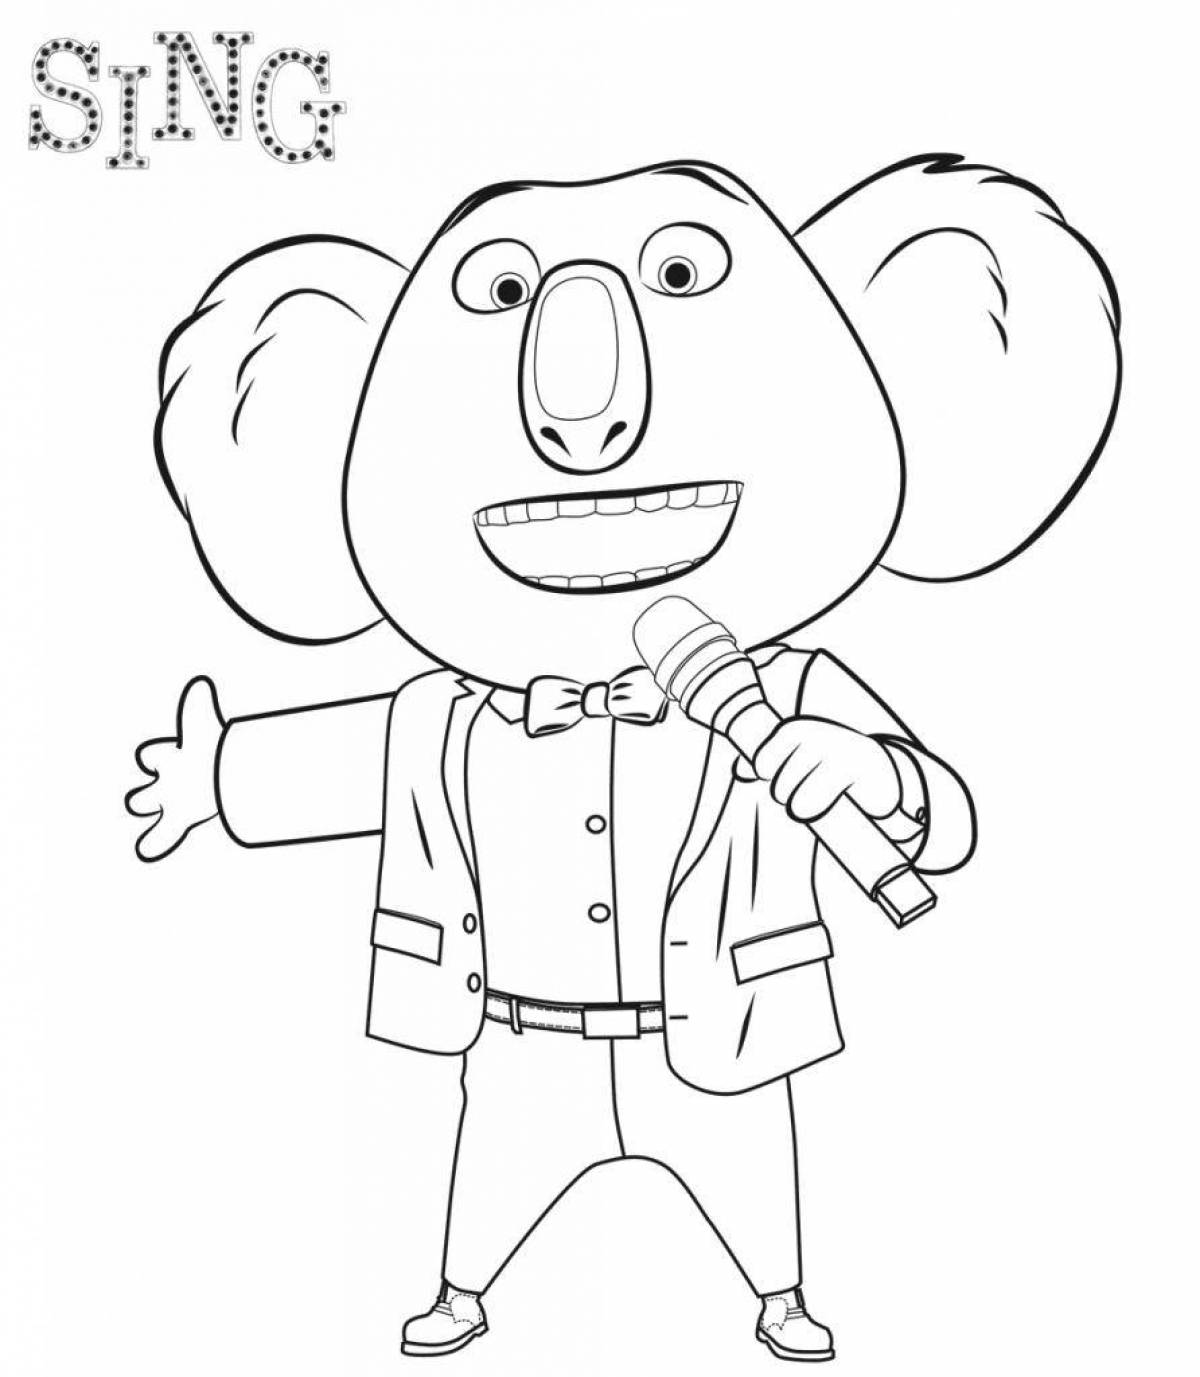 Coloring book funny song 2